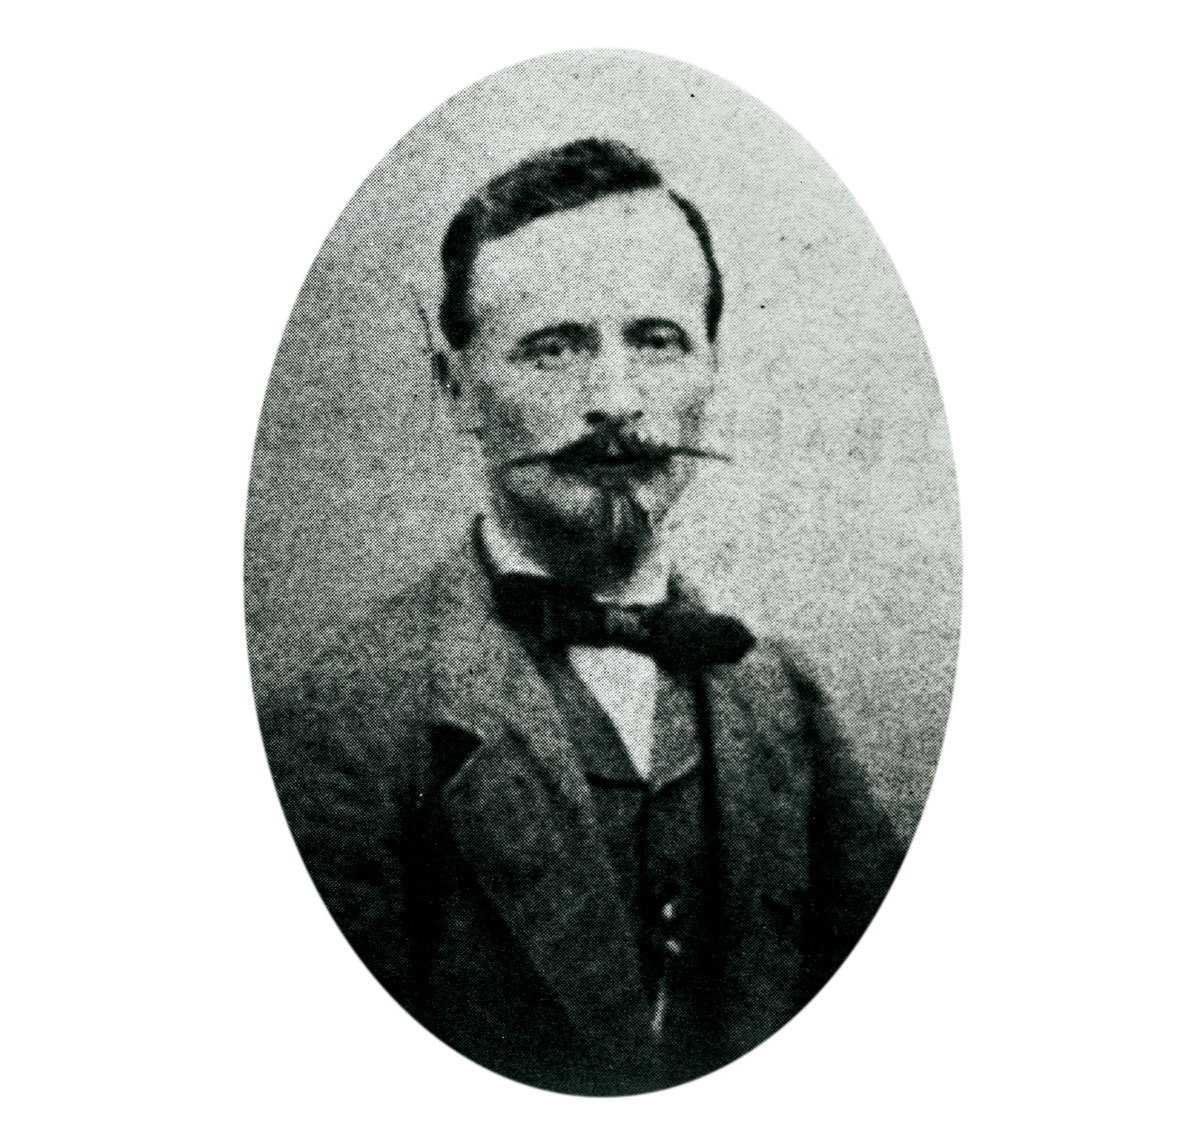 A photograph of Augustin Mouchot.